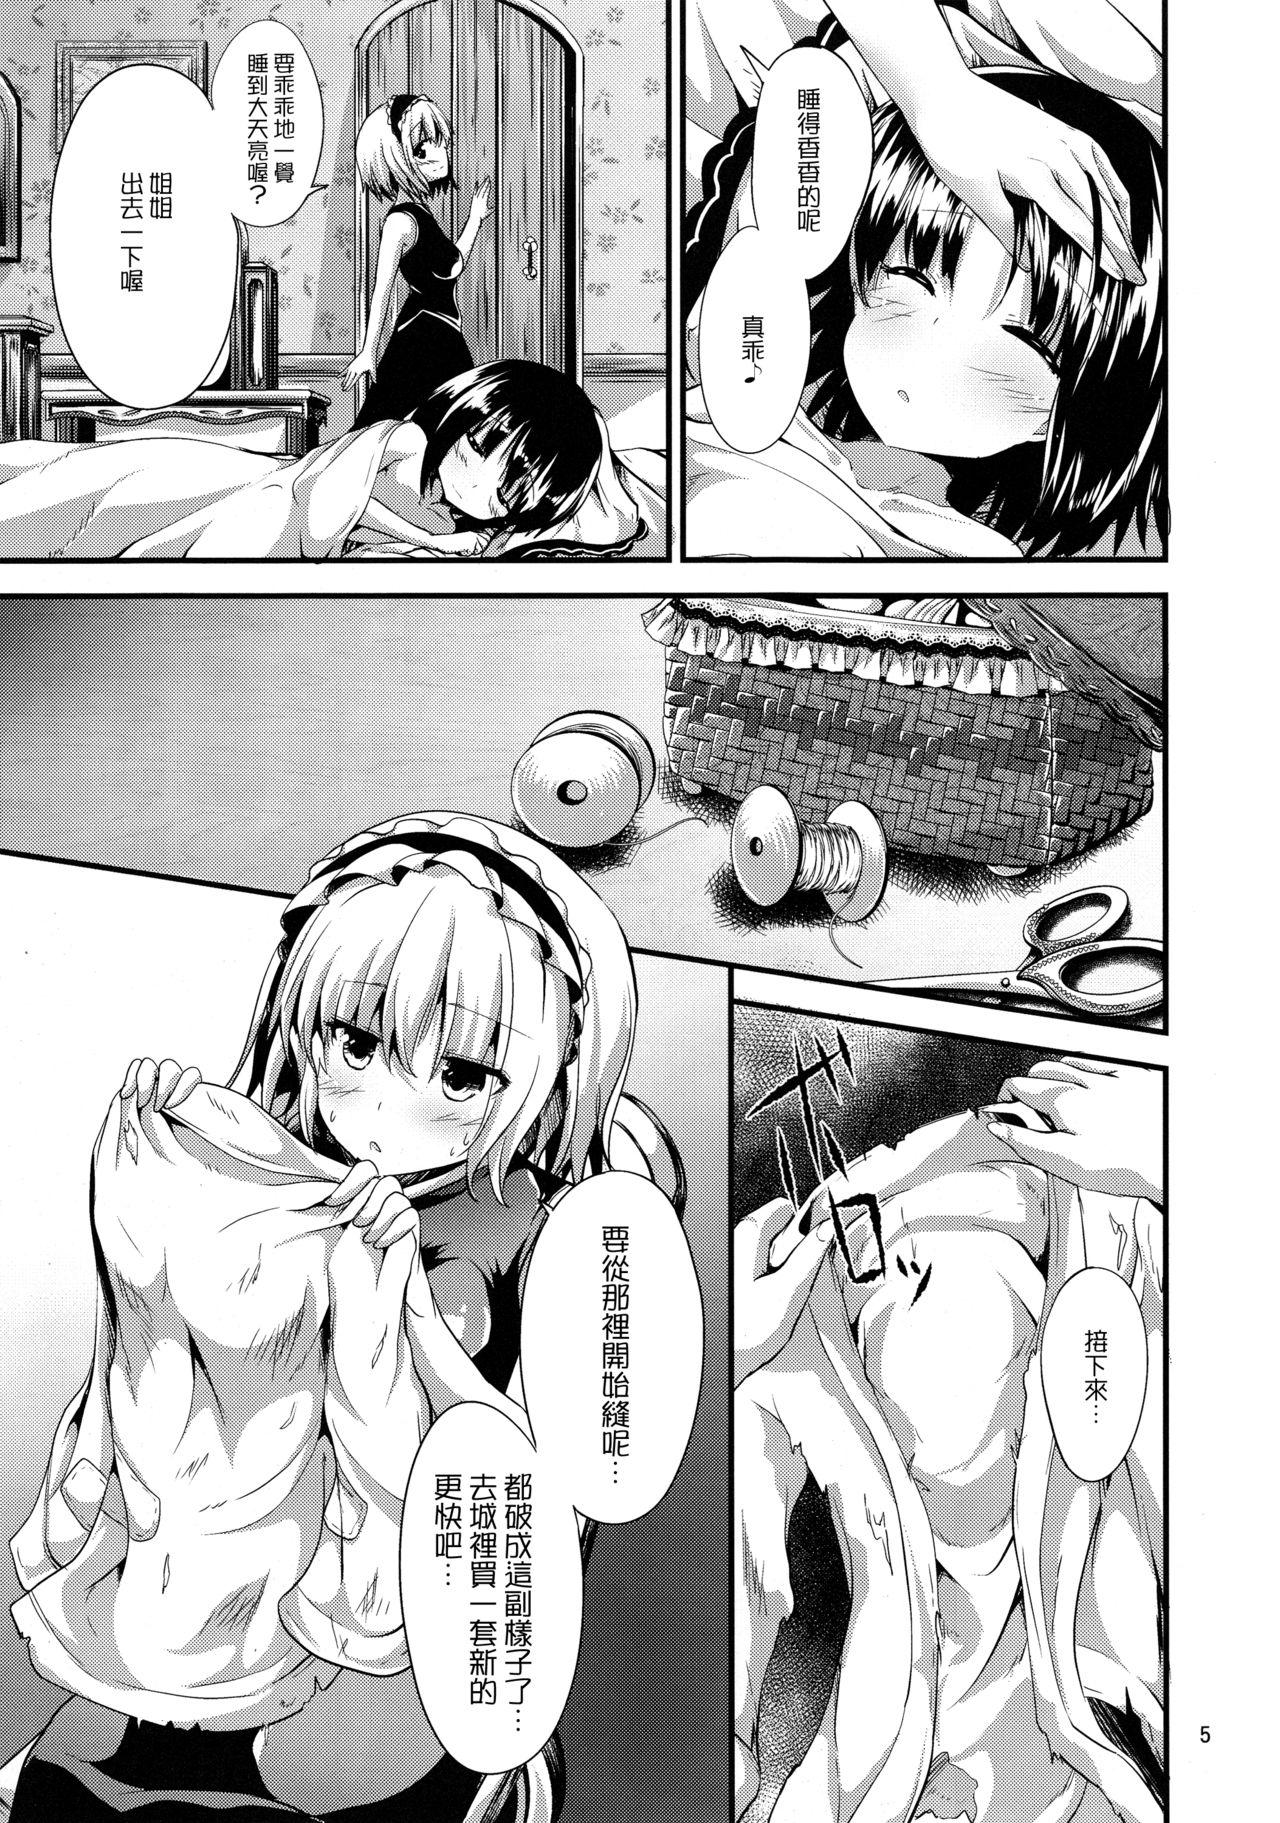 Putita Candy House 2 - Touhou project Thai - Page 5